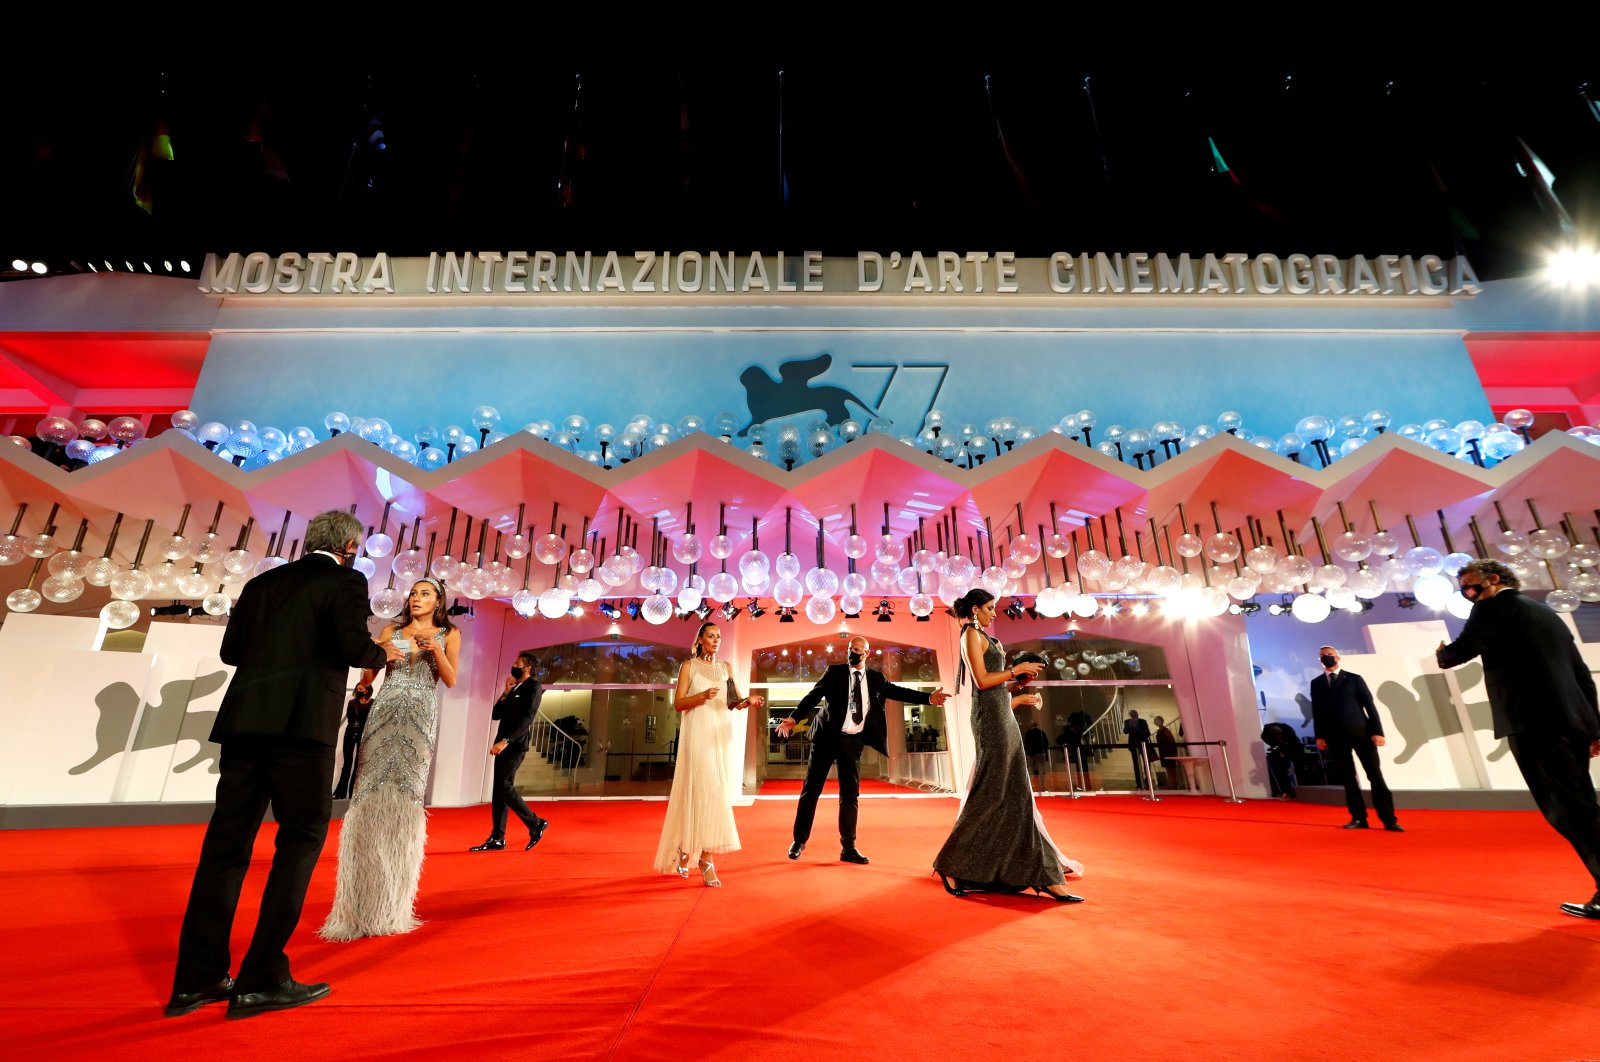 People gather for red carpet arrivals for the screening of the film "The Duke" at the 77th Venice Film Festival in Venice, Italy on Sept. 4, 2020. (Reuters Photo)